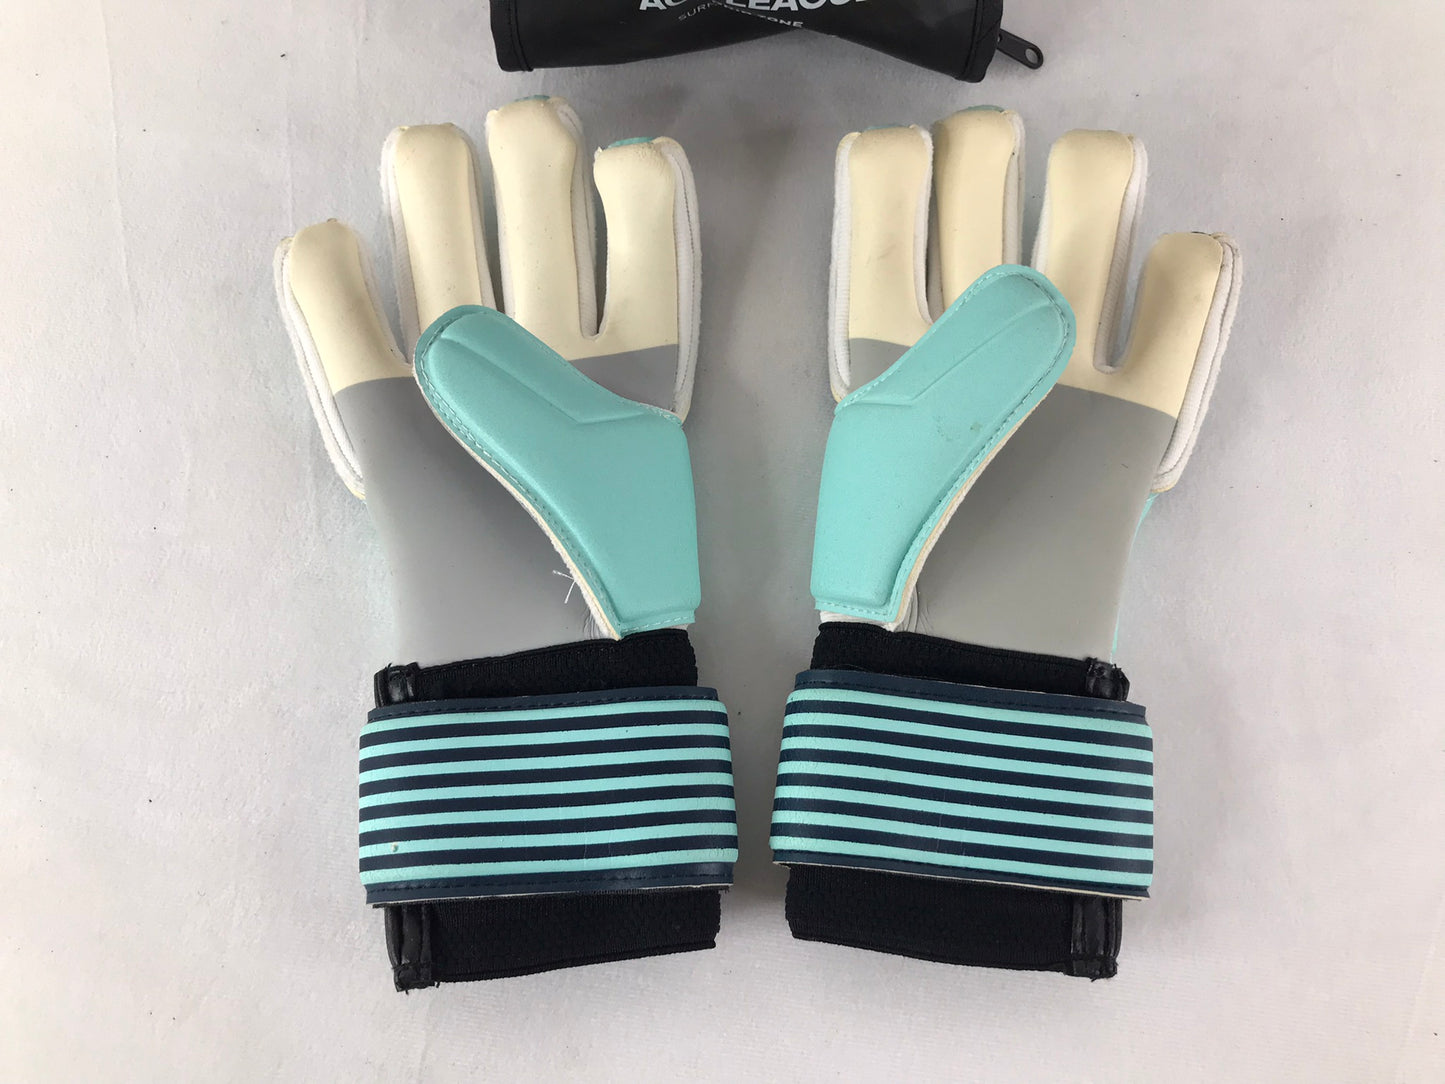 Soccer Goalie Gloves Child Size 5 Age 8-9 Adidas Ace Zone Pro Soccer Teal White New In Bag